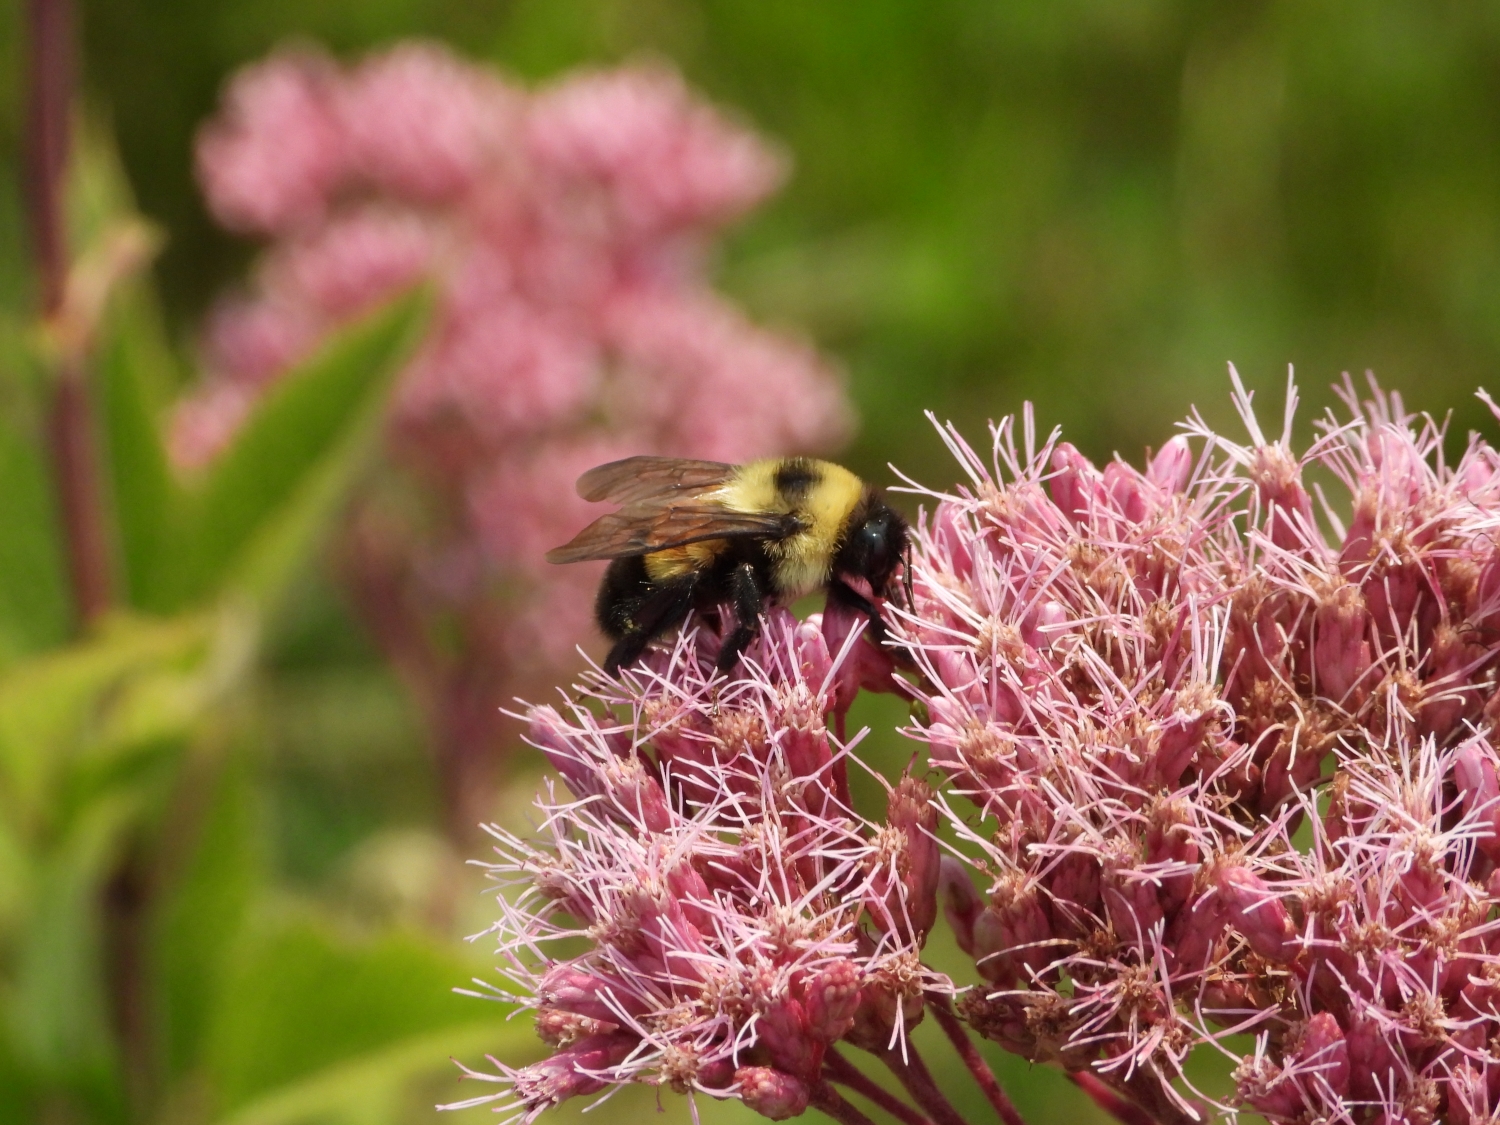 Link, a rusty patched bumble bee visits a cluster of fuzzy pink flower heads